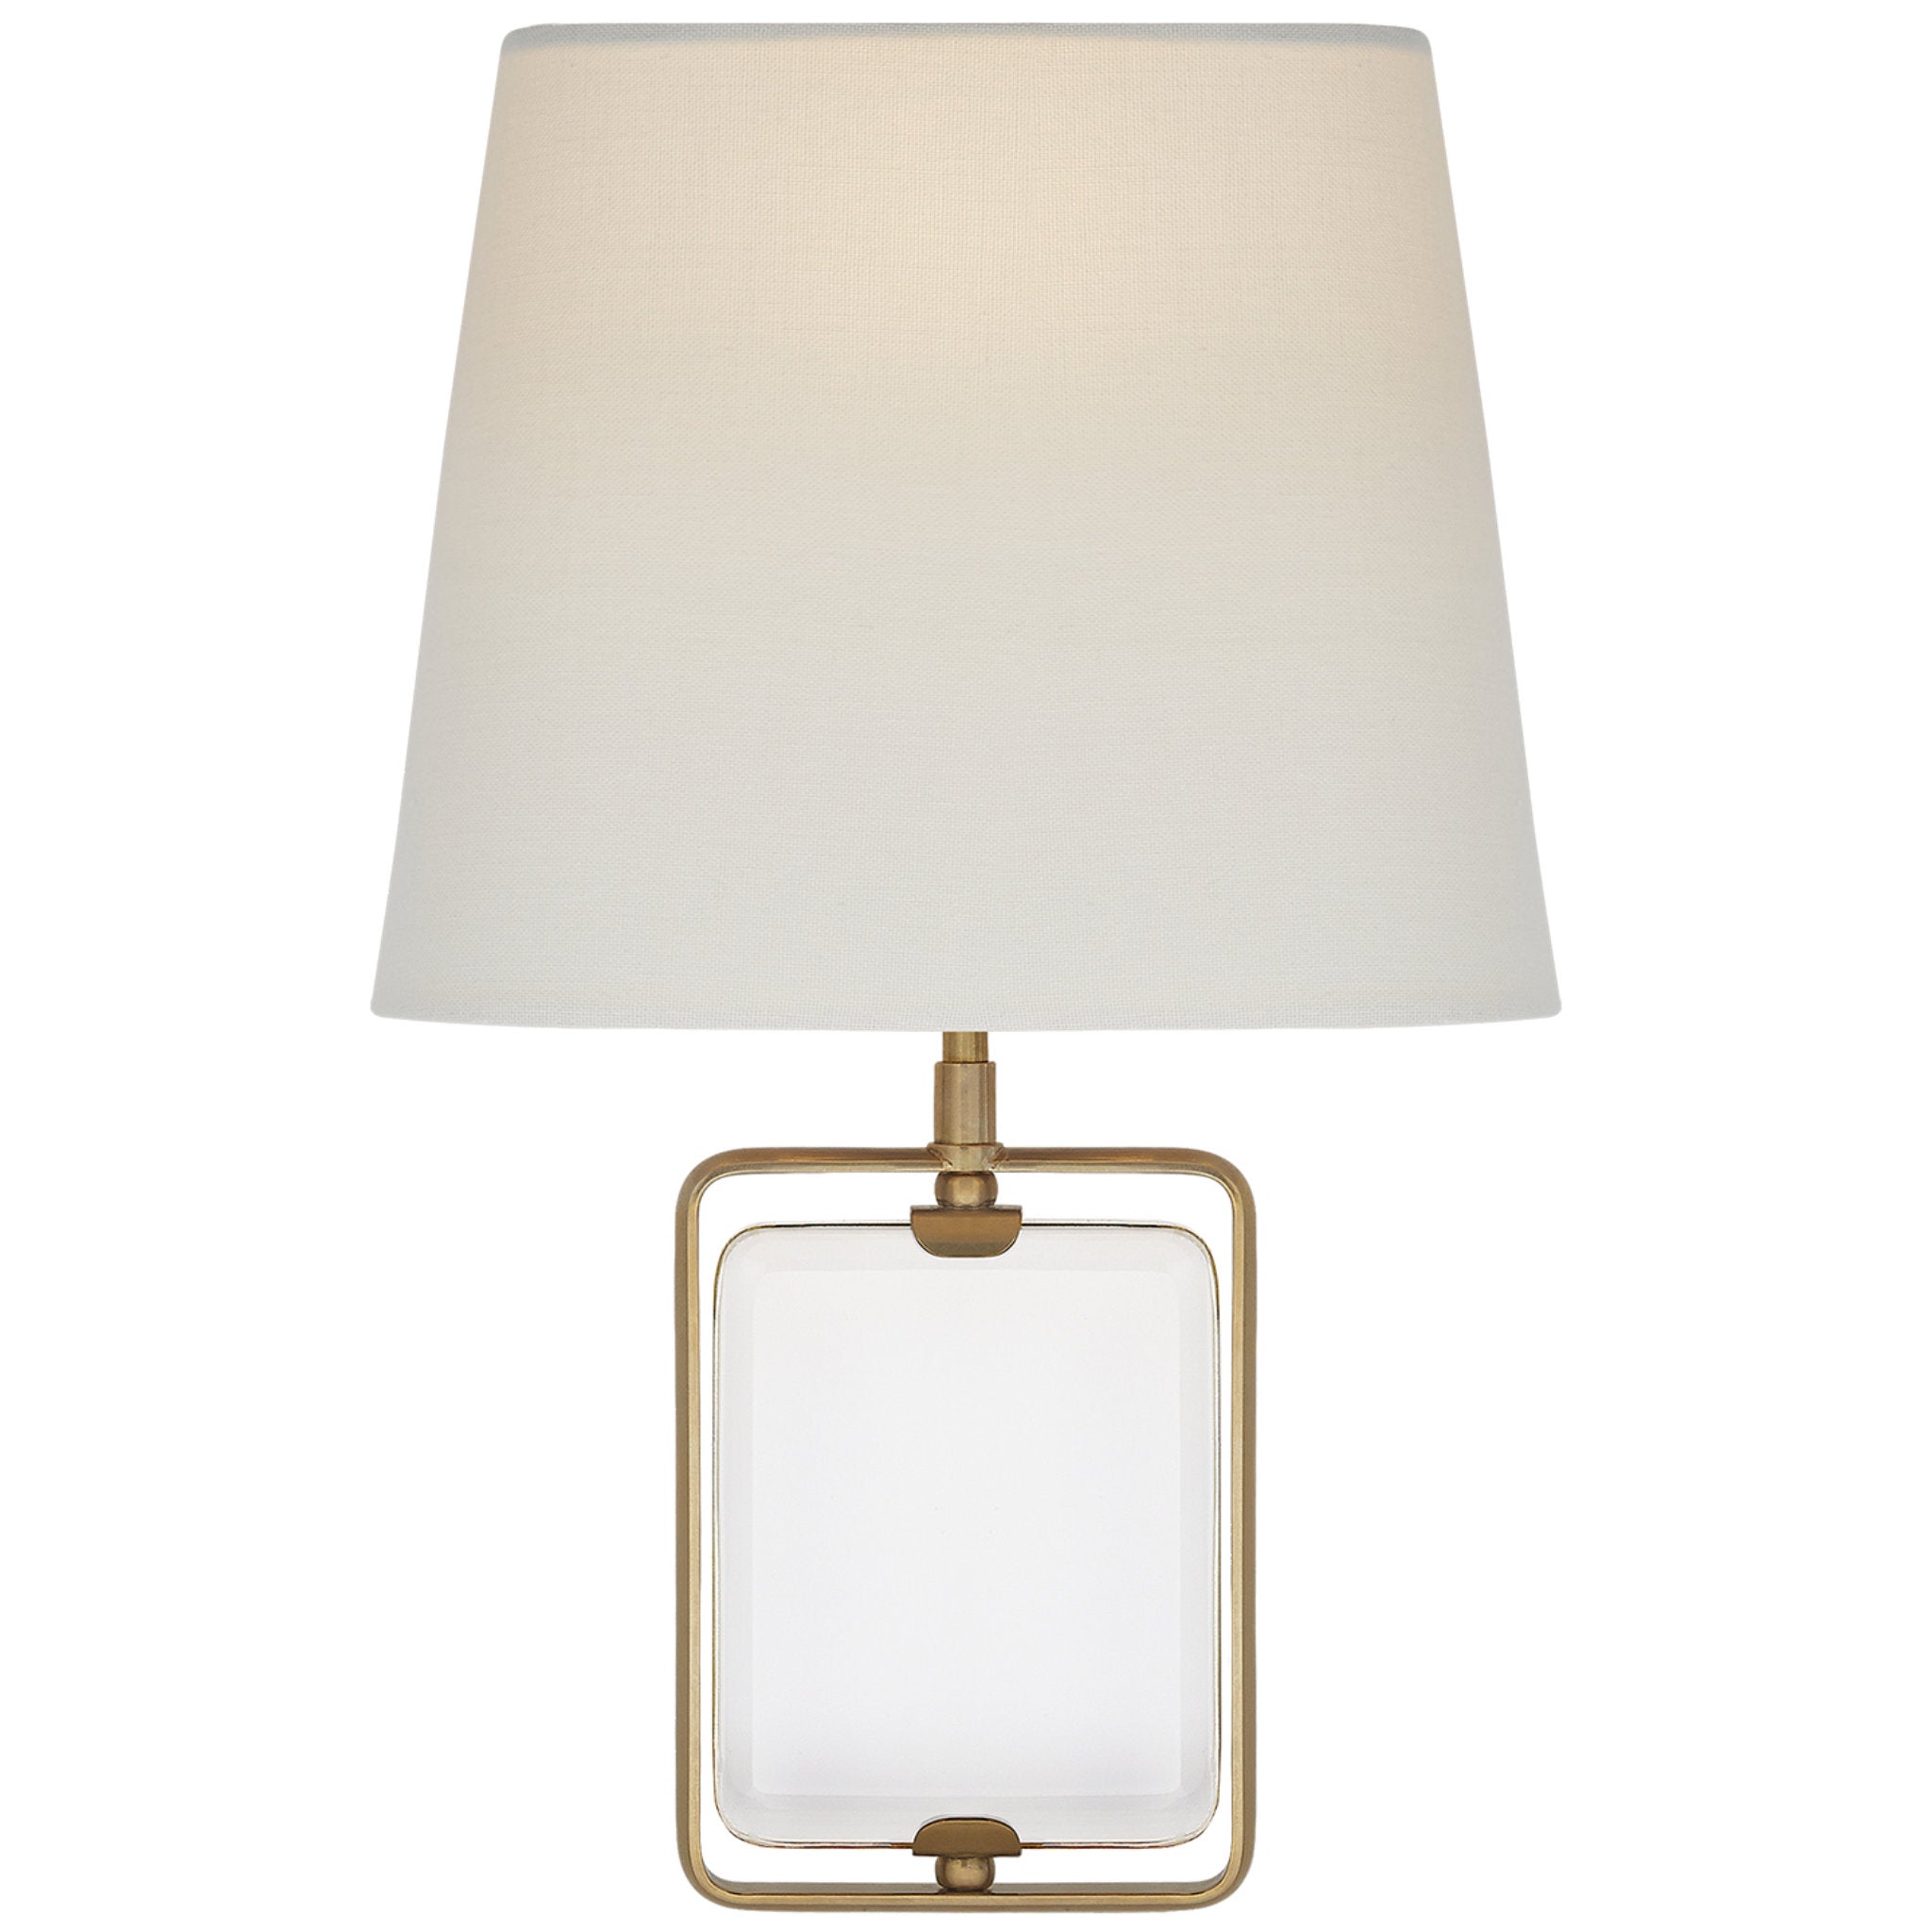 Suzanne Kasler Henri Framed Jewel Sconce in Crystal and Hand-Rubbed Antique Brass with Linen Shade